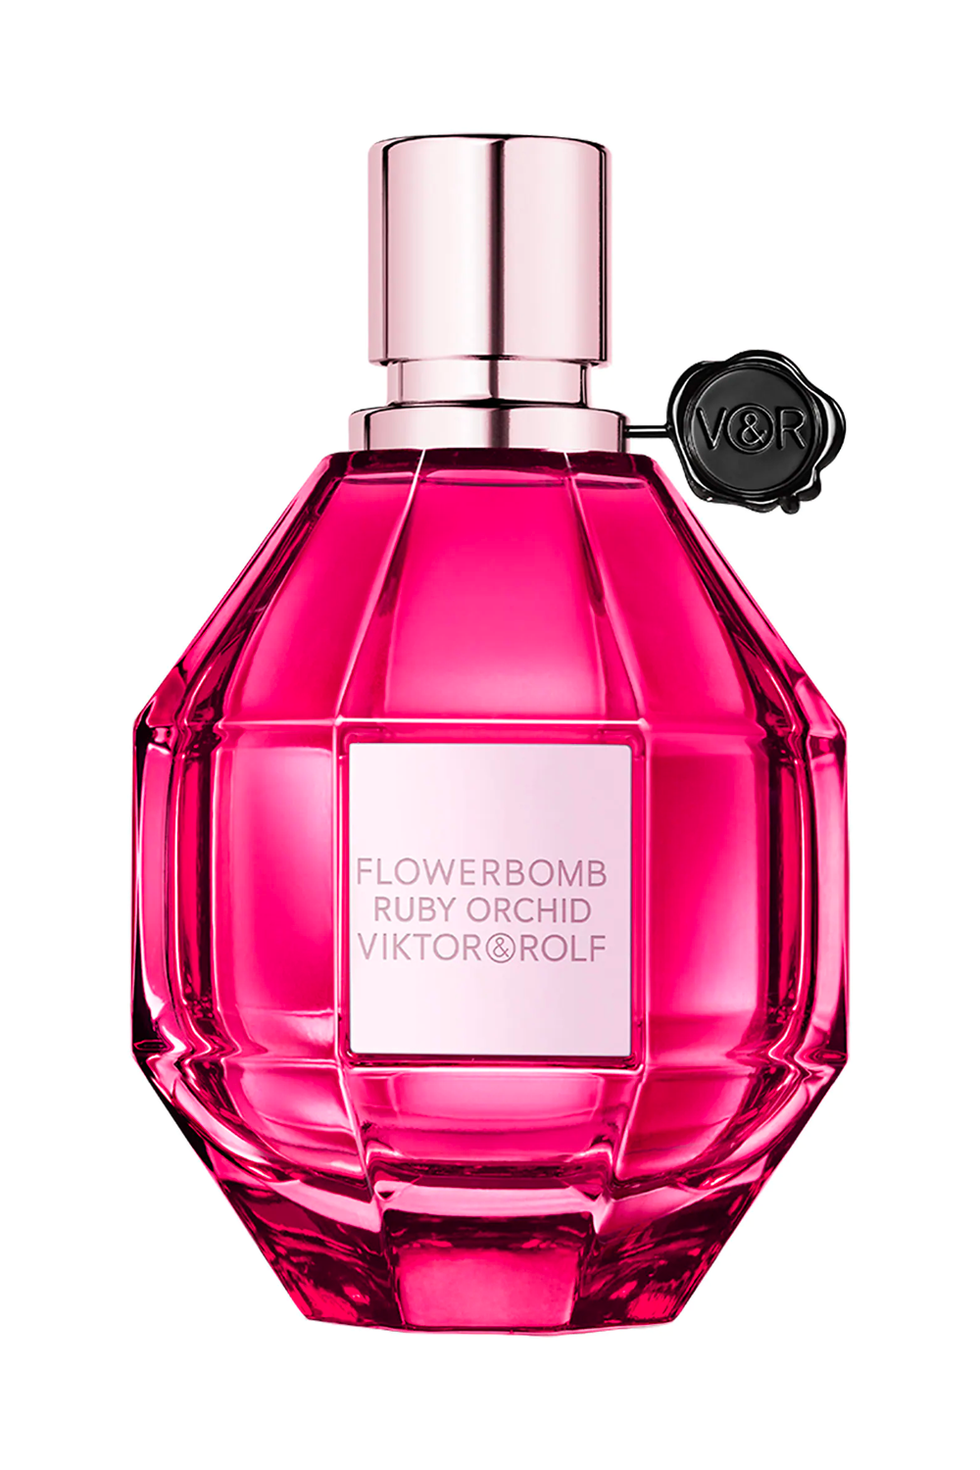 20 New Spring Fragrances to Add to Your Perfume Wardrobe